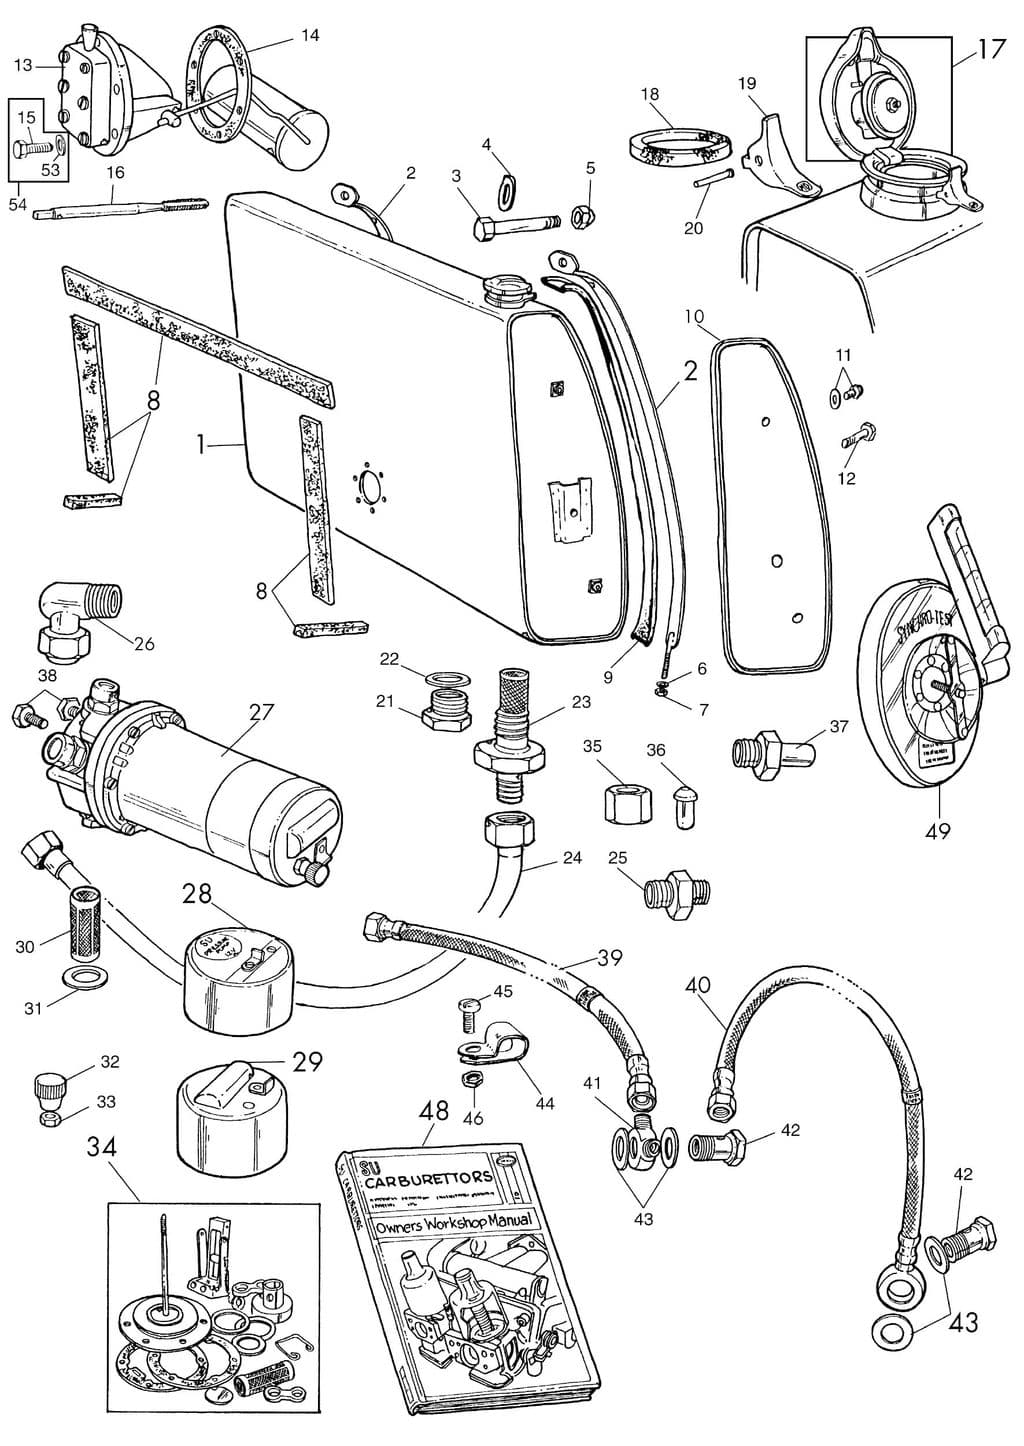 MGTC 1945-1949 - Fuel tanks | Webshop Anglo Parts - Fuel system - 1